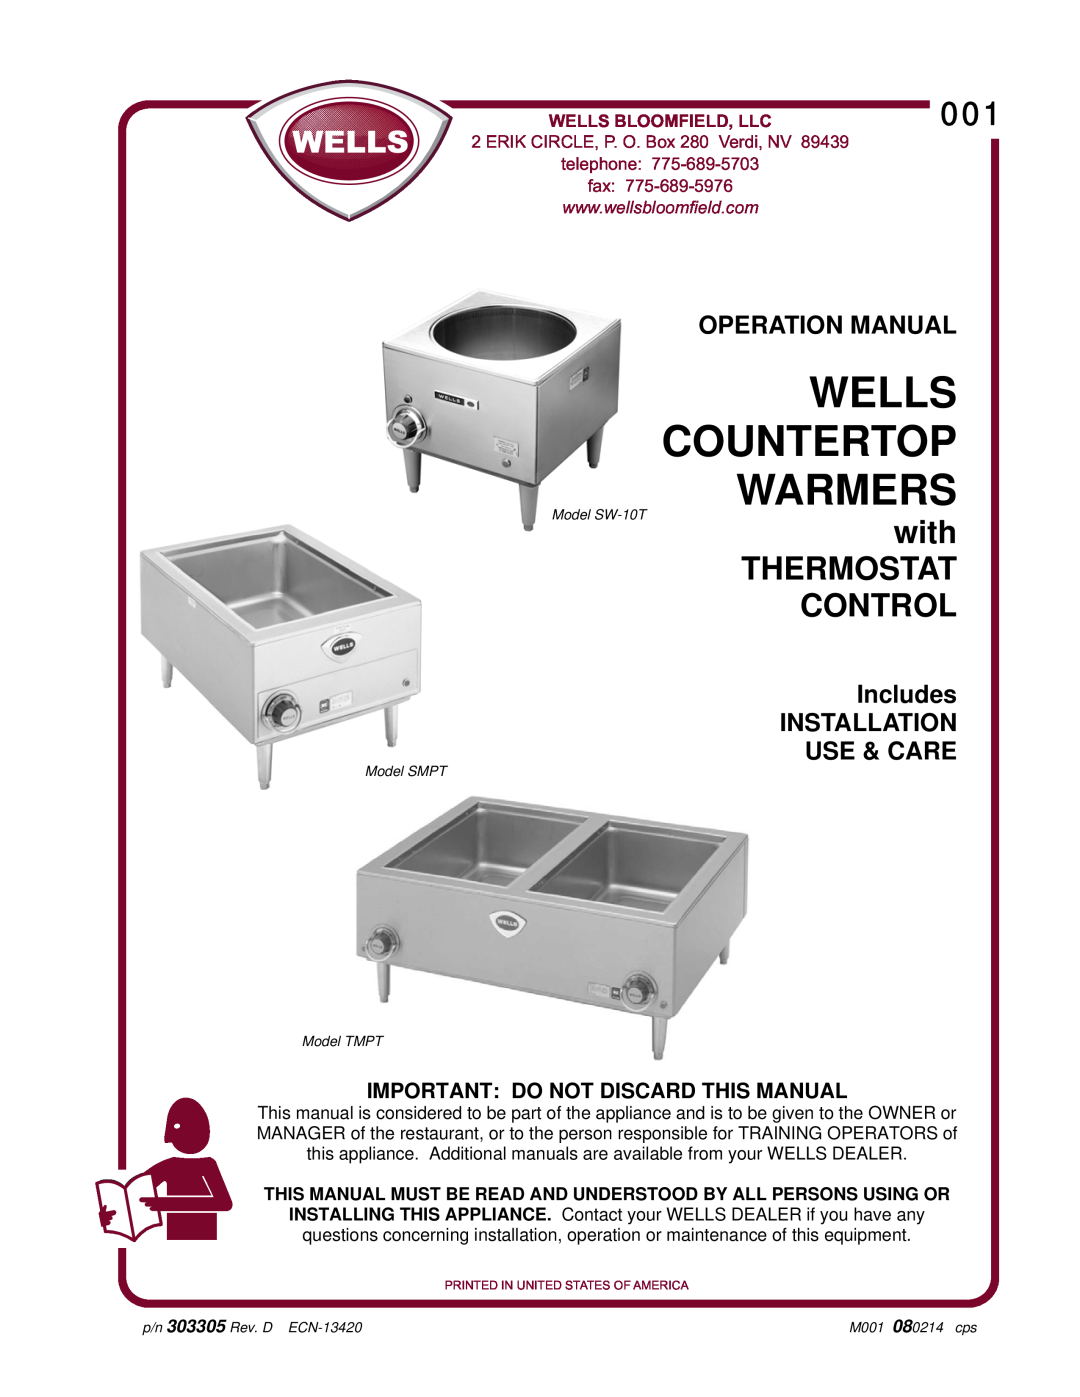 Wells TMPT operation manual with, Thermostat Control, Important Do Not Discard This Manual, Wells Countertop Warmers, fax 